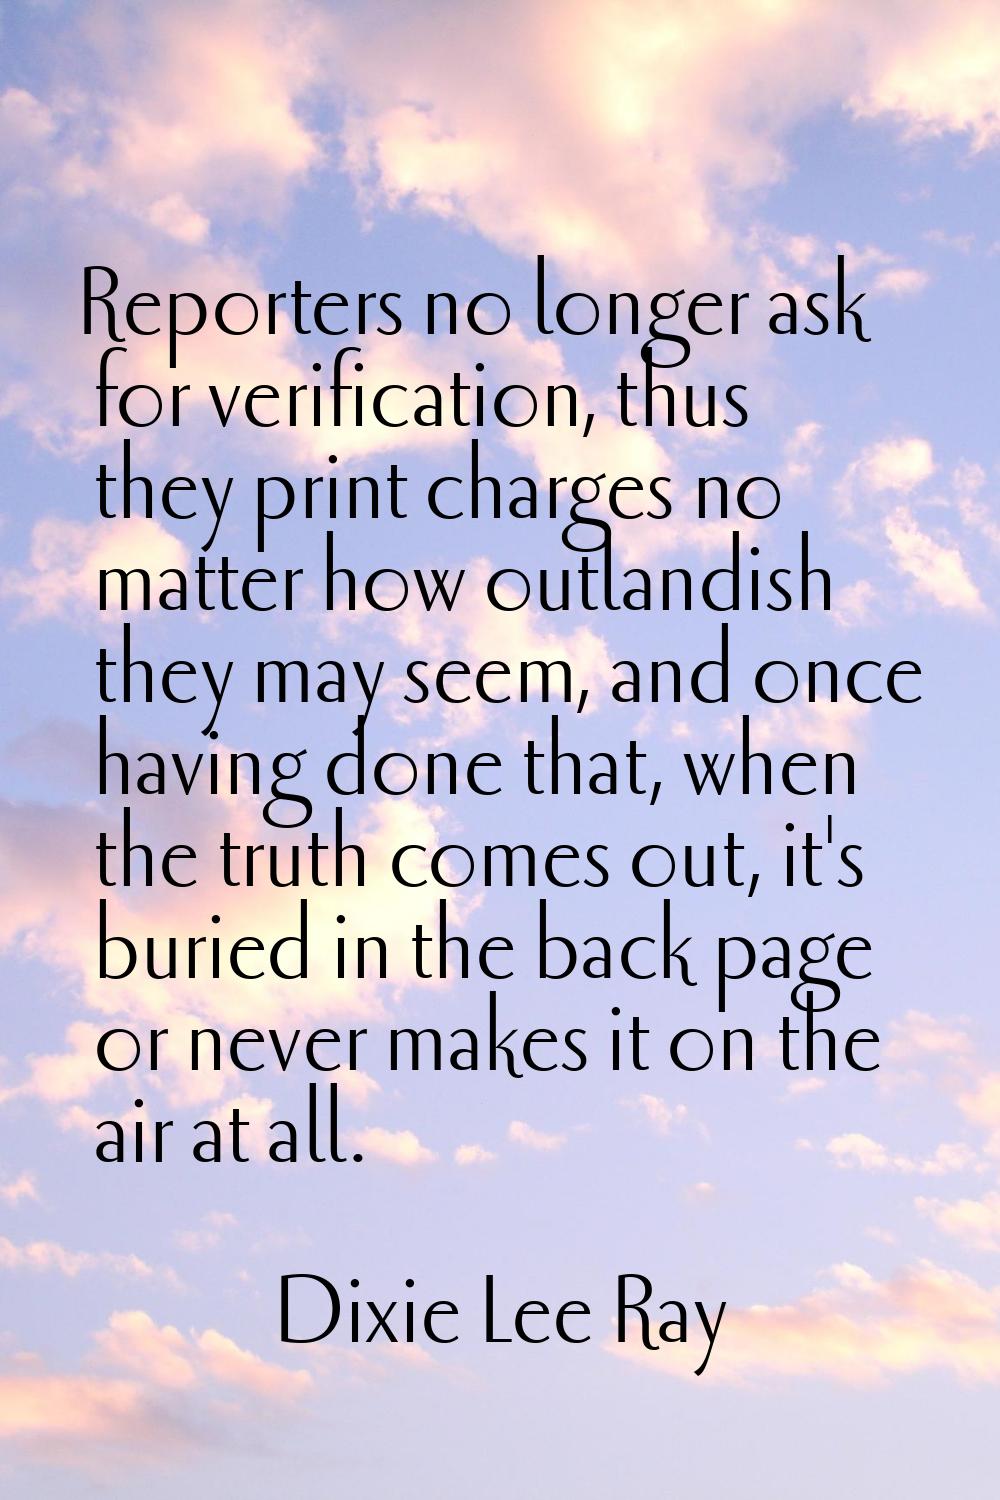 Reporters no longer ask for verification, thus they print charges no matter how outlandish they may